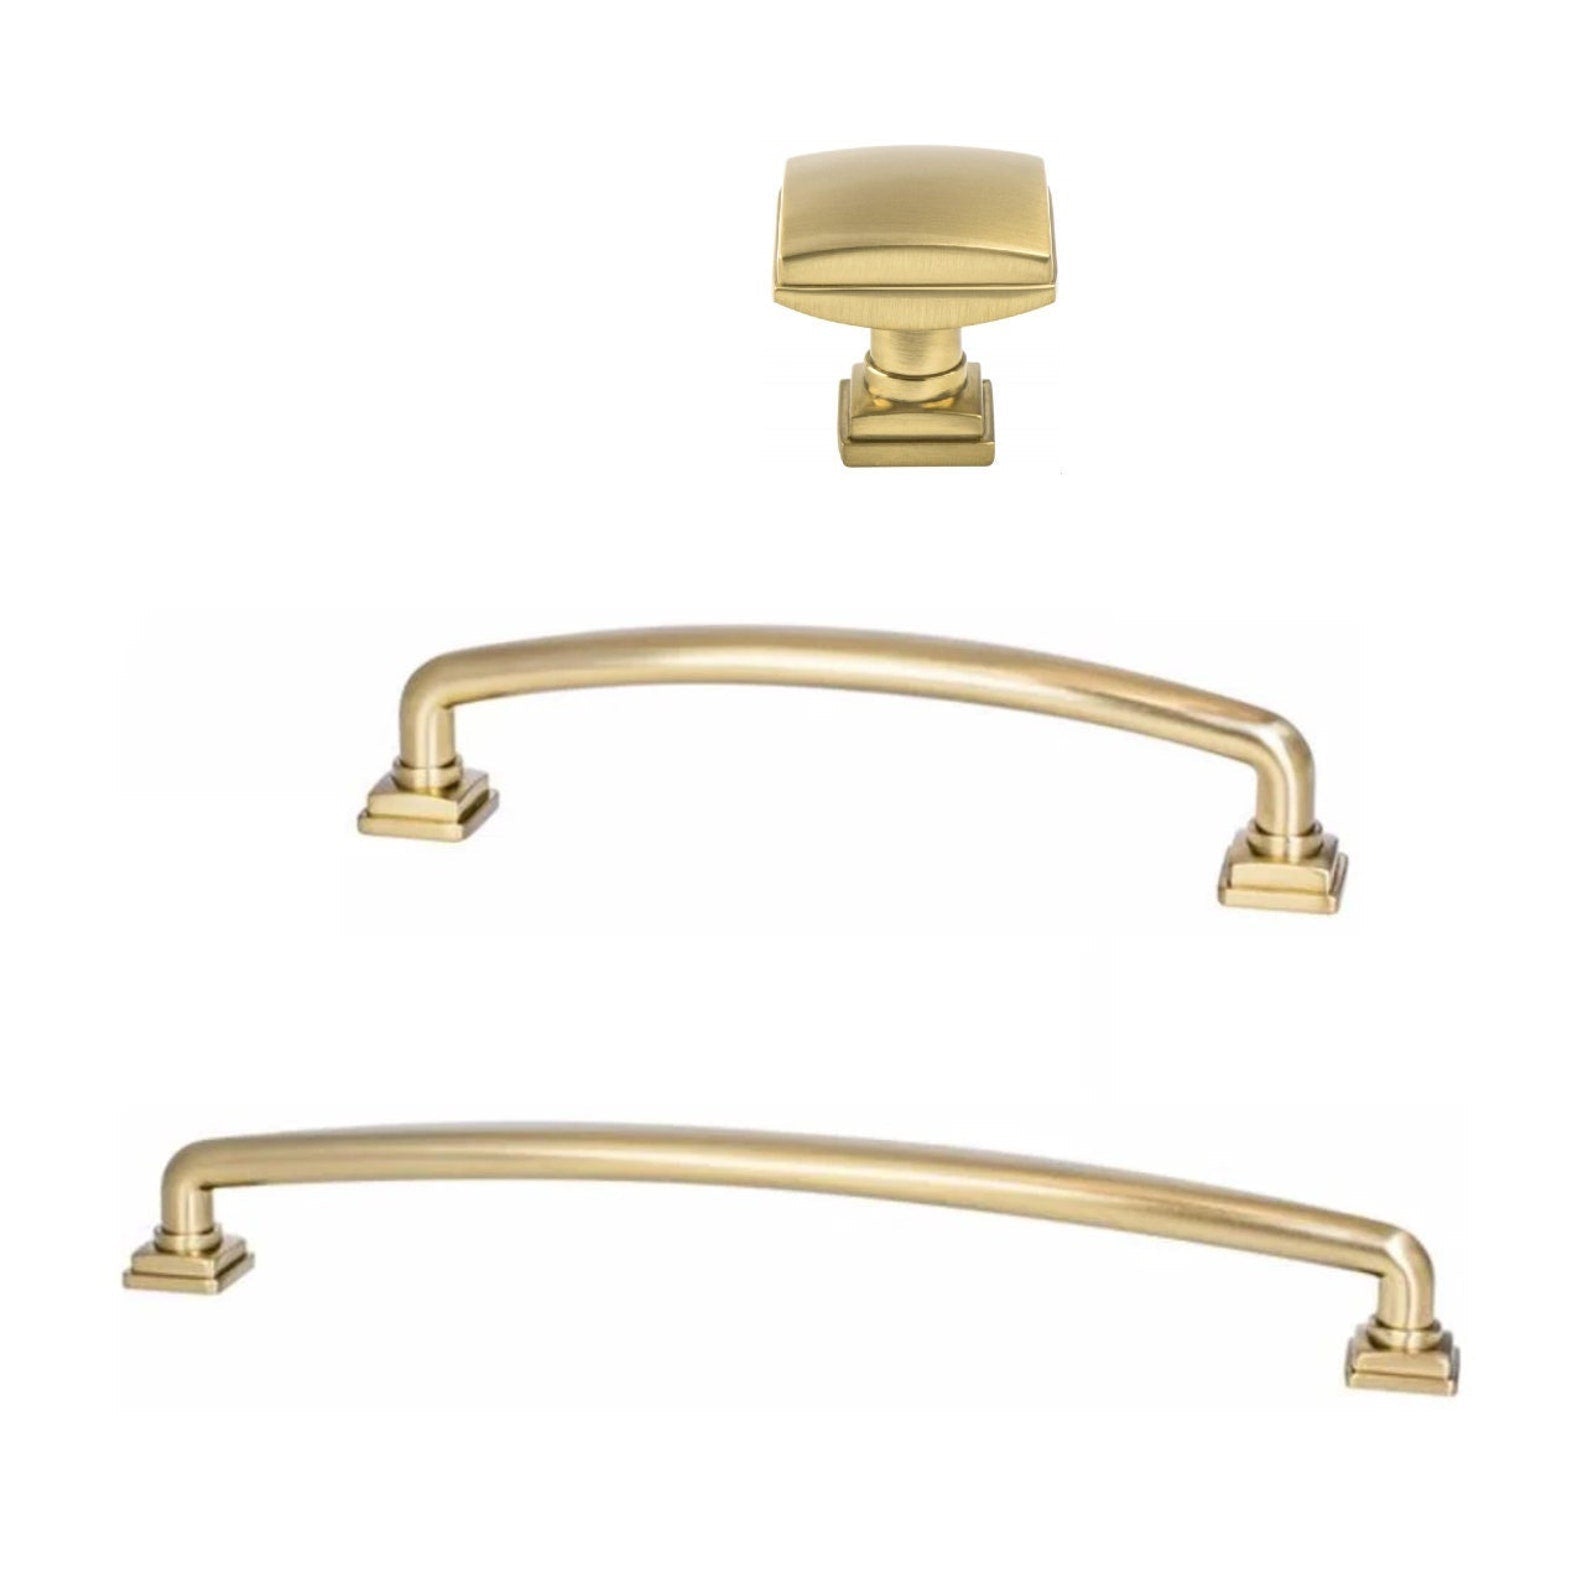 Kelly No.2 Cabinet Knob and Drawer Pulls in Satin Brass - Forge Hardware Studio